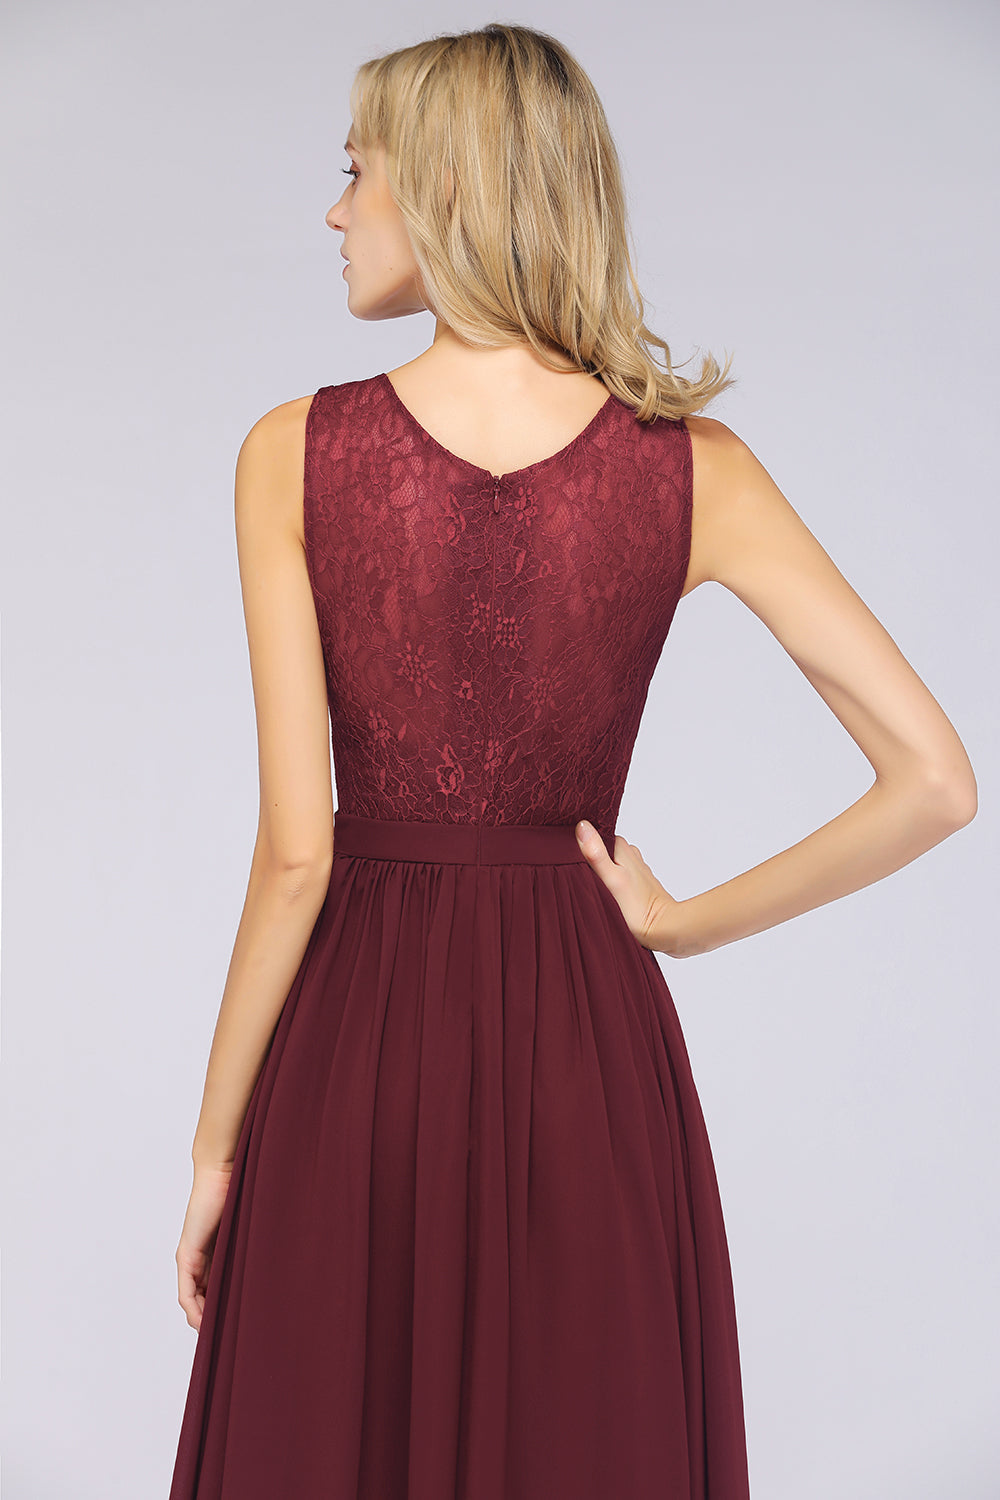 Affordable Burgundy V-Neck Ruffle Bridesmaid Dresses with Lace-Back-27dress